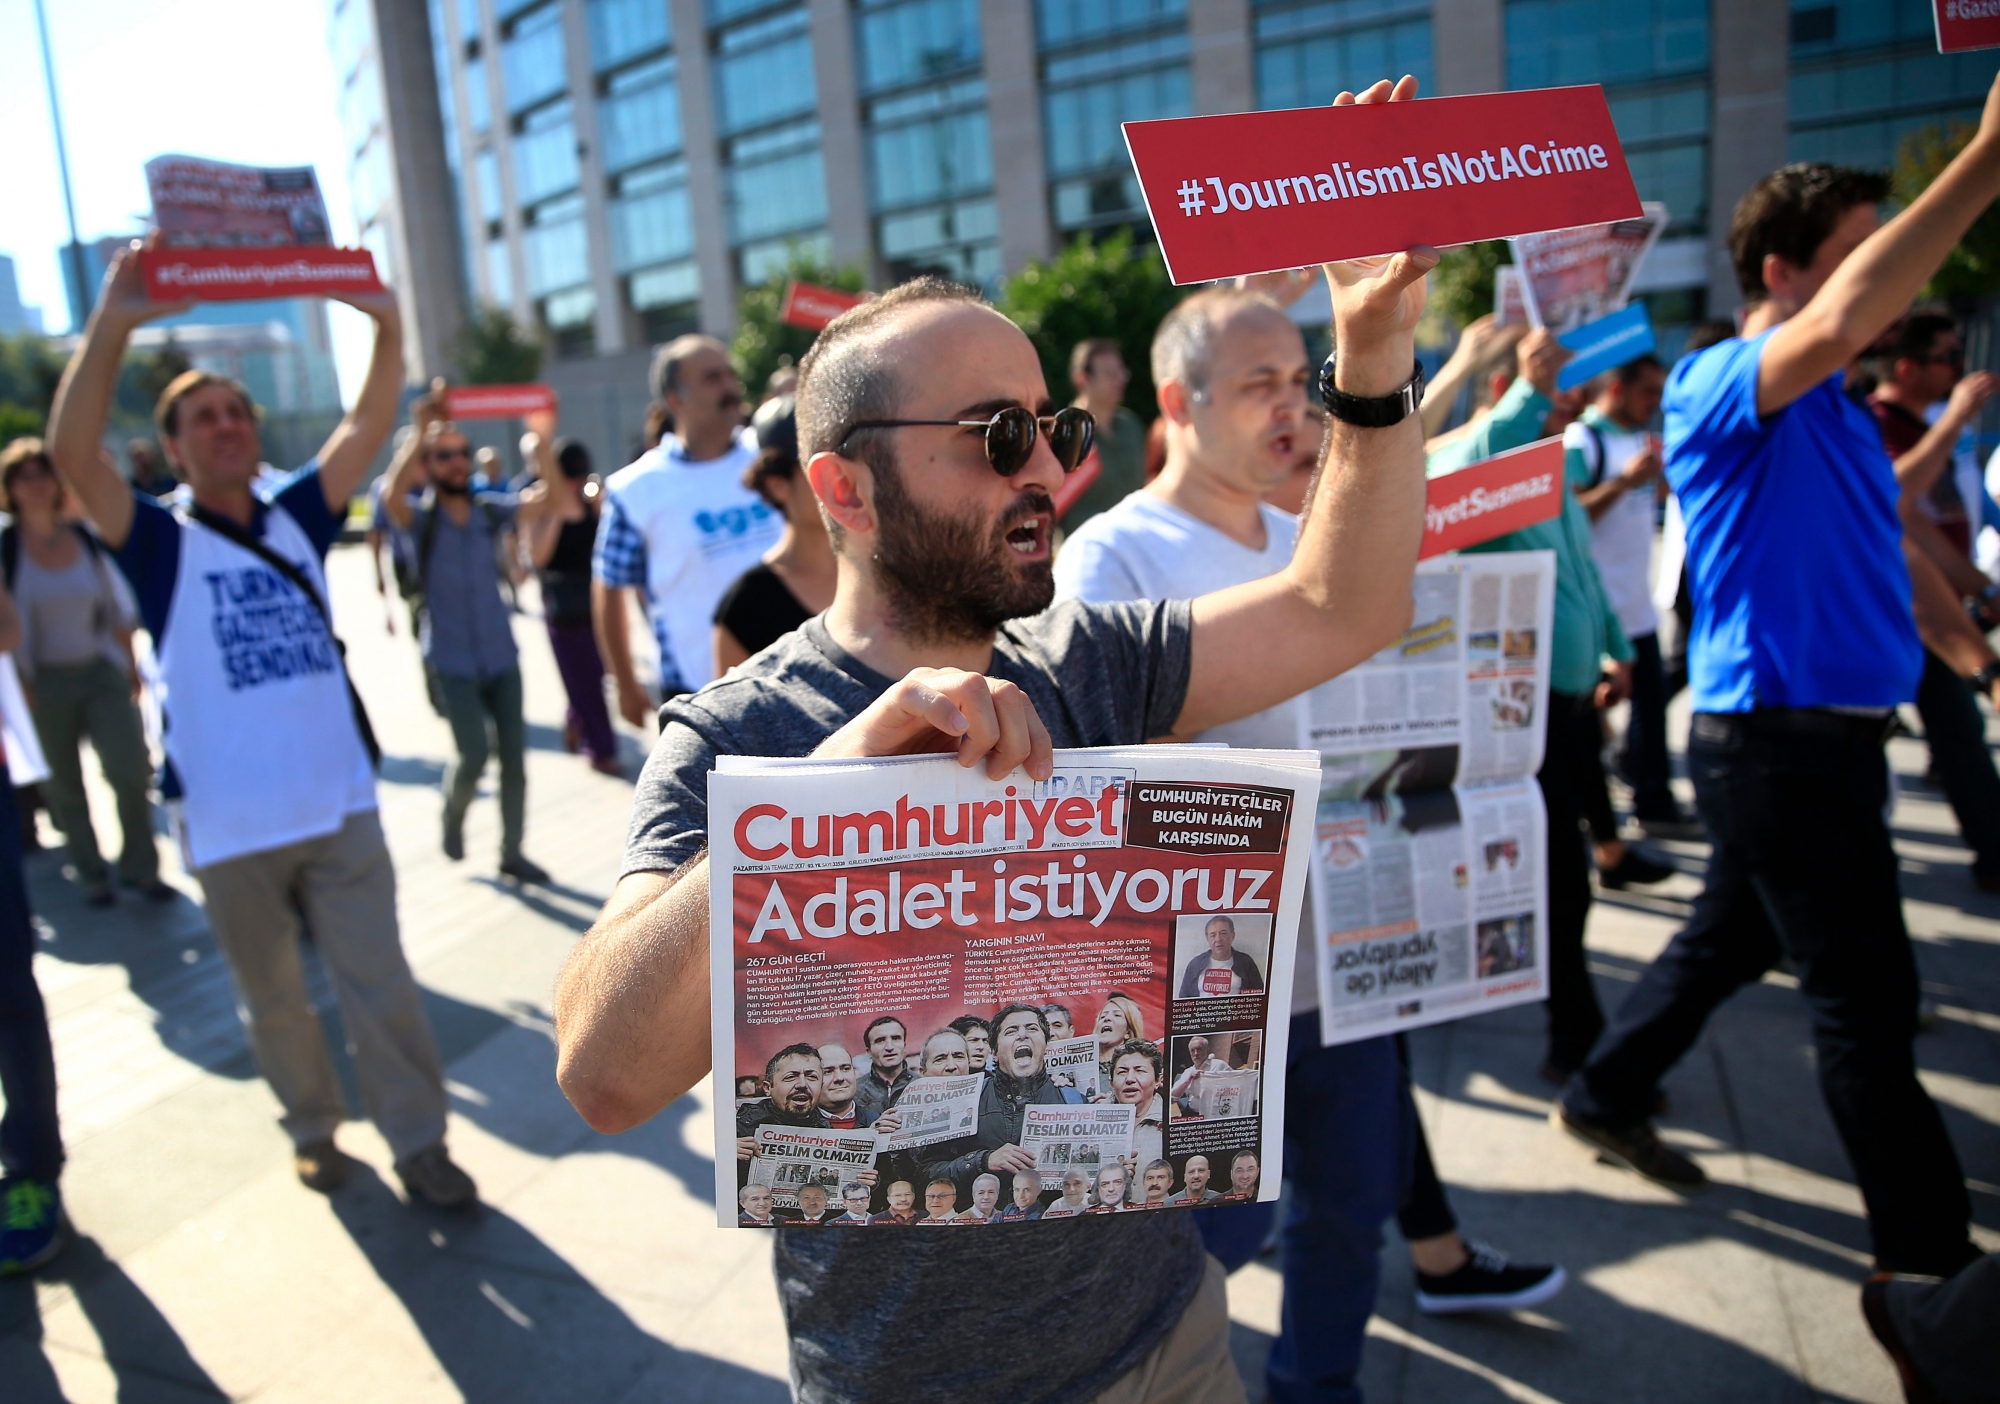 Activists, one holding today's copy of the Cumhuriyet newspaper, march to a court in Istanbul, Monday, July 24, 2017, protesting against the trial of journalists and staff from the newspaper, accused of aiding terror organizations. Journalists and staff from the Turkish newspaper staunchly opposed to President Recep Tayyip Erdogan have gone on trial in Istanbul, accused of aiding terror organizations - a case that has added to concerns over rights and freedoms in Turkey. The newspaper headline reads in Turkish: "We Want Justice."  (AP Photo/Lefteris Pitarakis) Turkey Journalists Trial